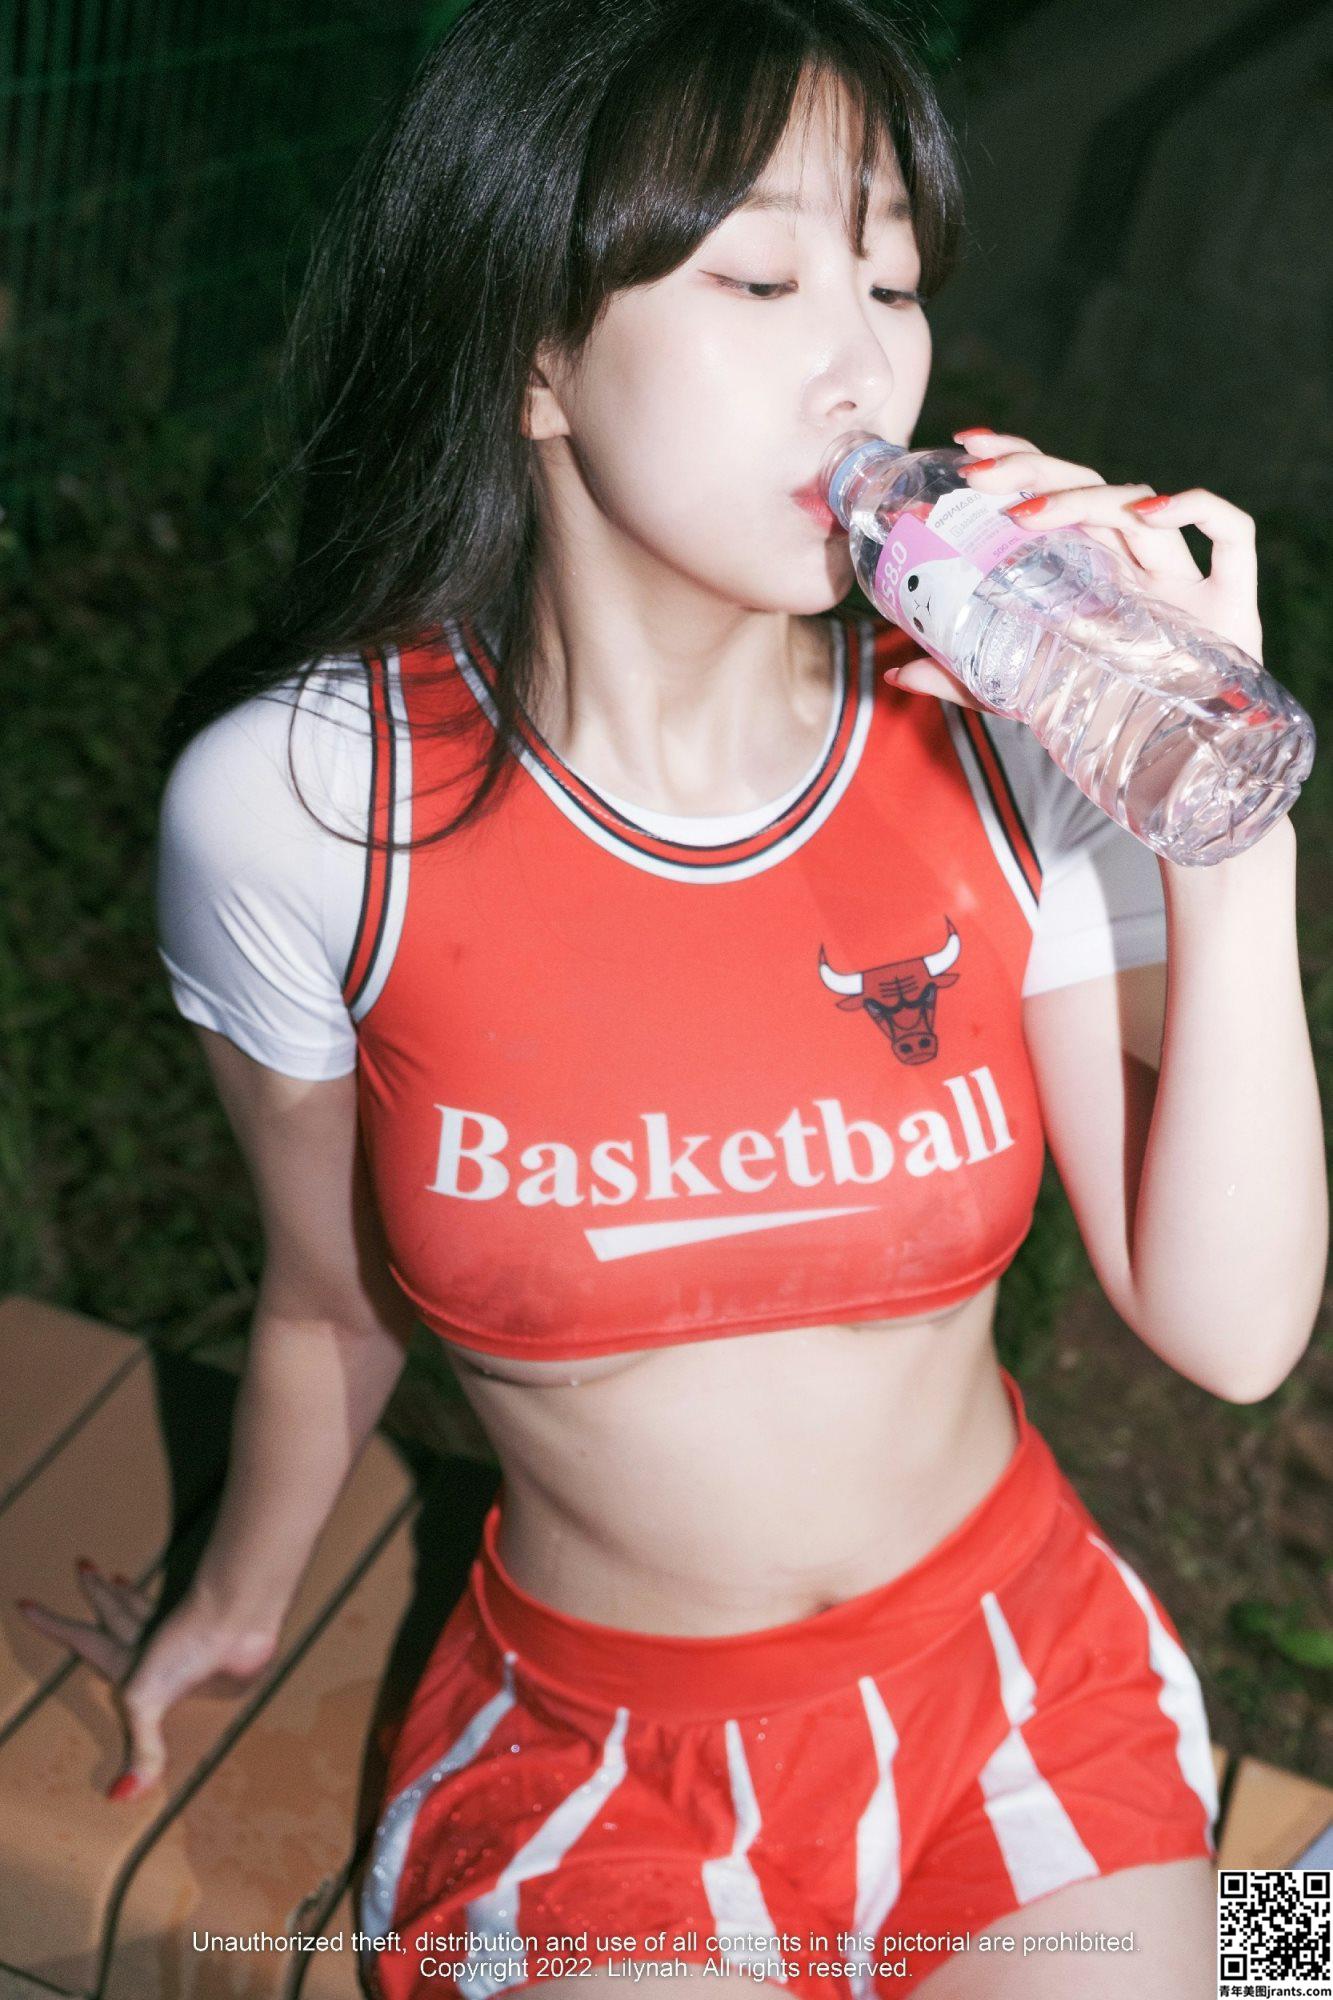 [Lilynah] Shaany VOL. 07 &#8211; Cheering Only